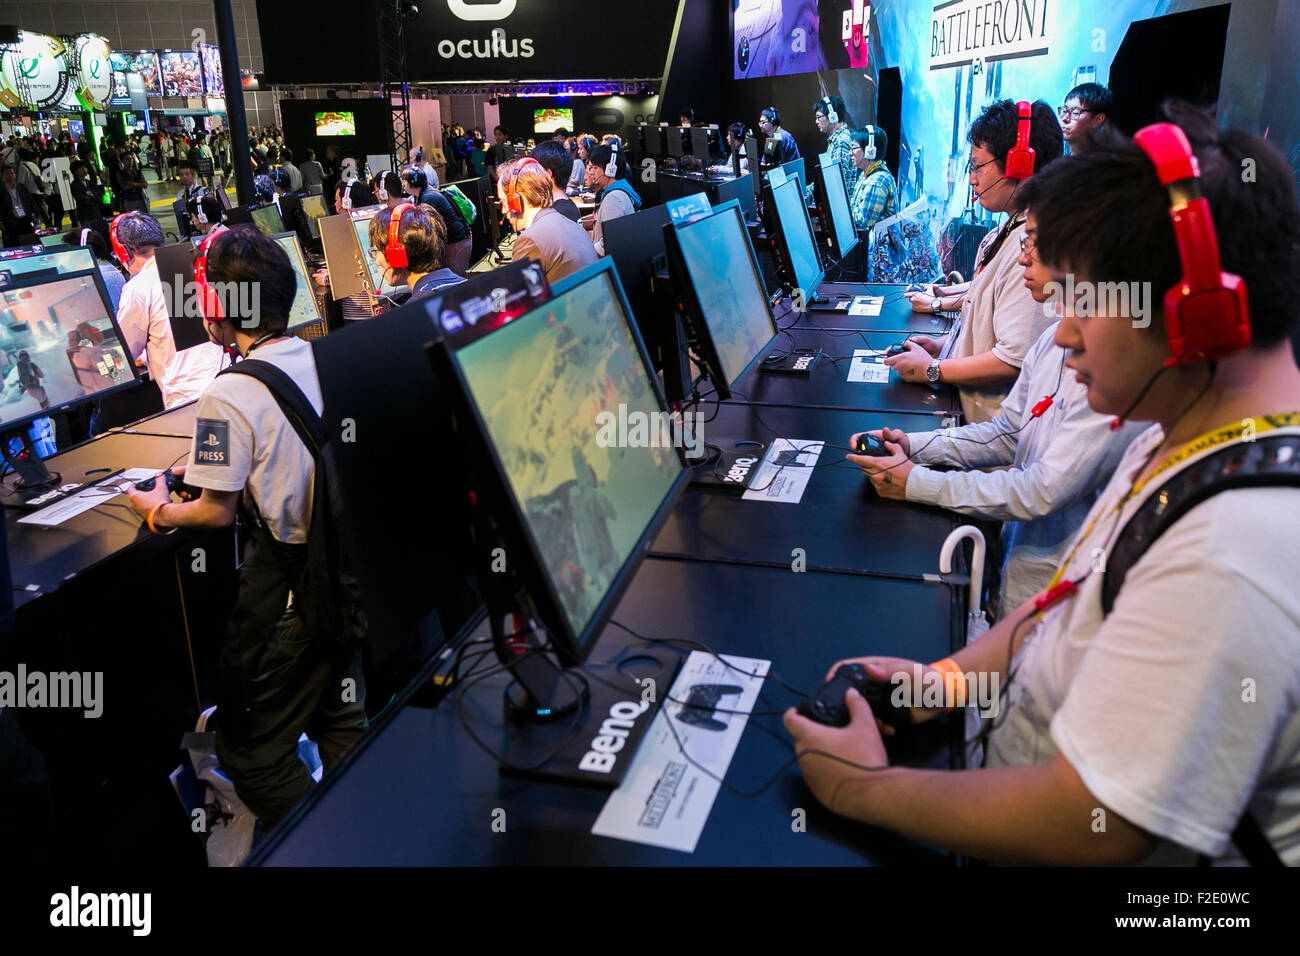 Tokyo, Japan. 17th September, 2015. Visitors play Star Wars: Battlefront video game at the Tokyo Game Show on September 17, 2015, Chiba, Japan. The world's biggest trade show for video game developers brings together 480 exhibitors from 37 different countries and runs from September 17th to 20th at the International Convention Complex Makuhari Messe in Chiba. This year the exhibition registered its' highest number of exhibitors ever, with 2,009 booths showing some 1,283 game titles for smartphones, games consoles, PC and TV platforms. Credit:  Aflo Co. Ltd./Alamy Live News Stock Photo